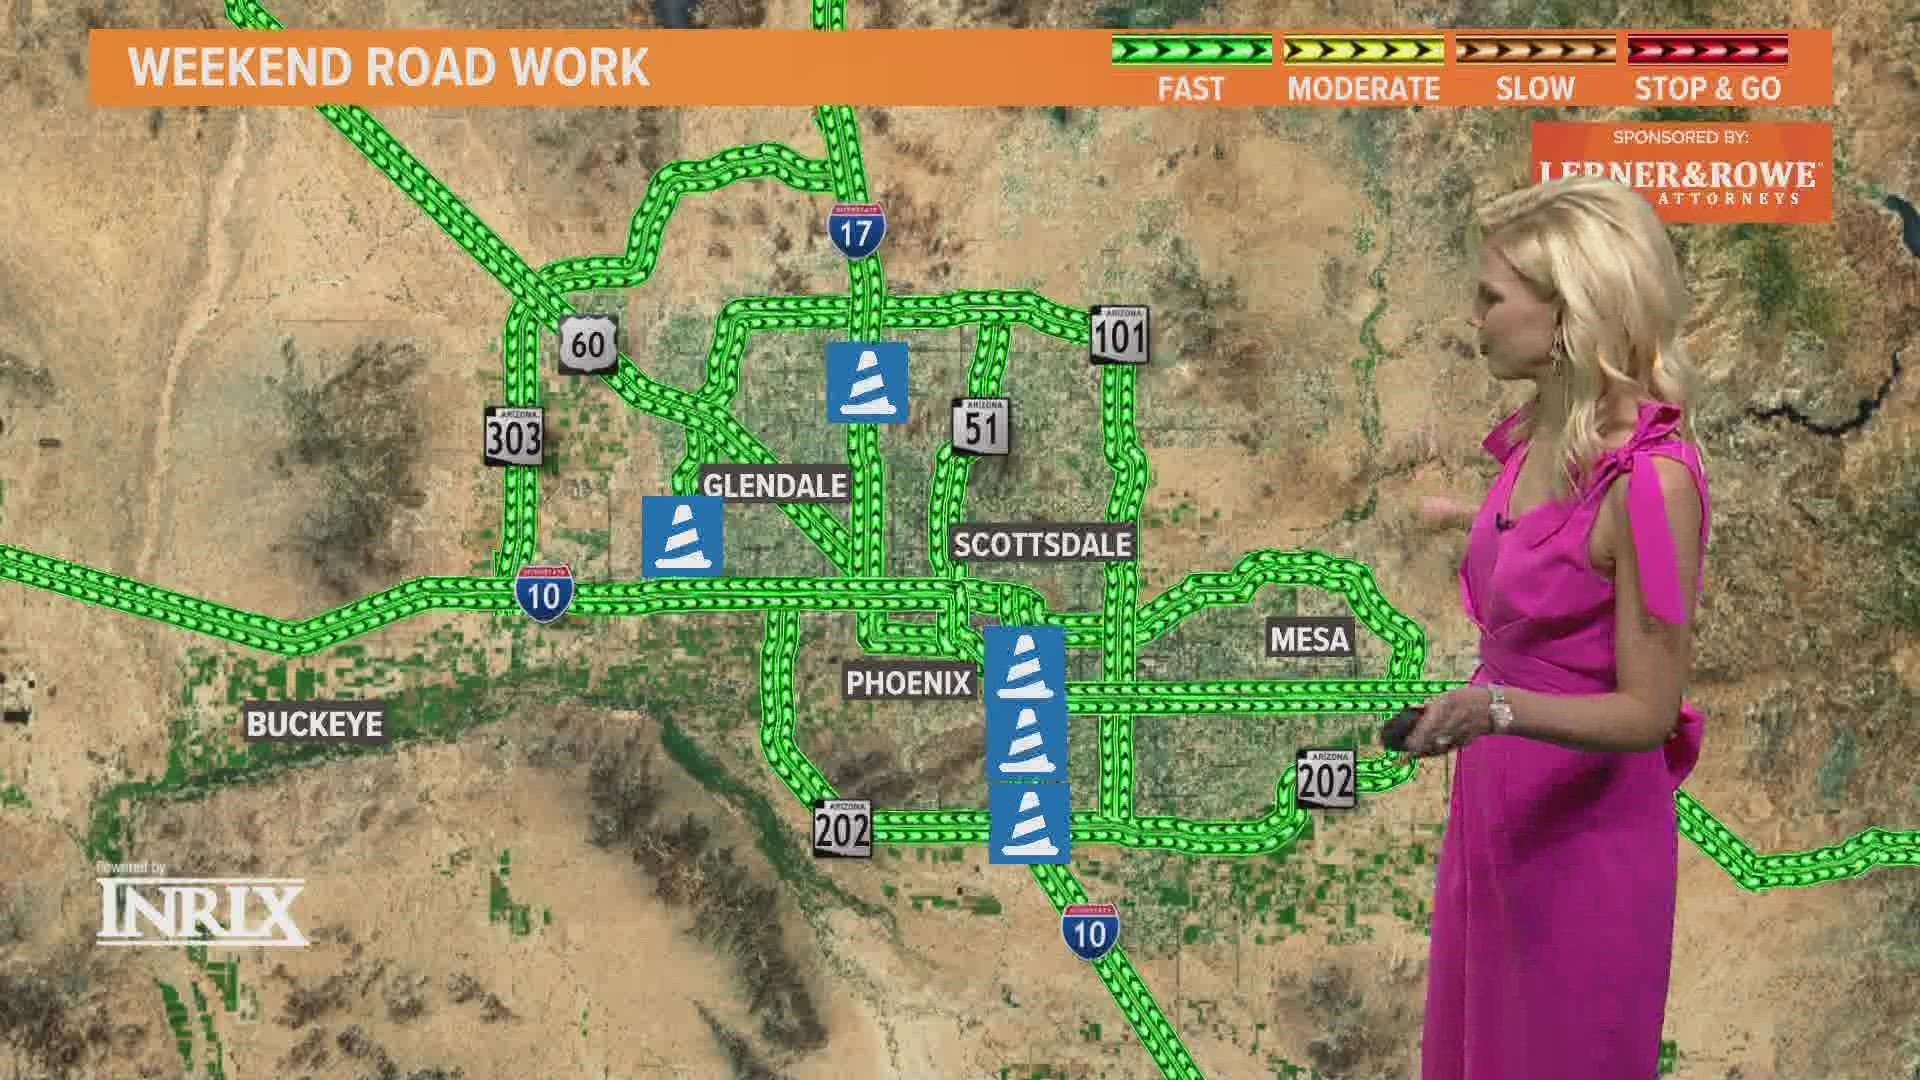 Krystle Henderson has a breakdown of the current closures and detours drivers will find on Valley roads this weekend.